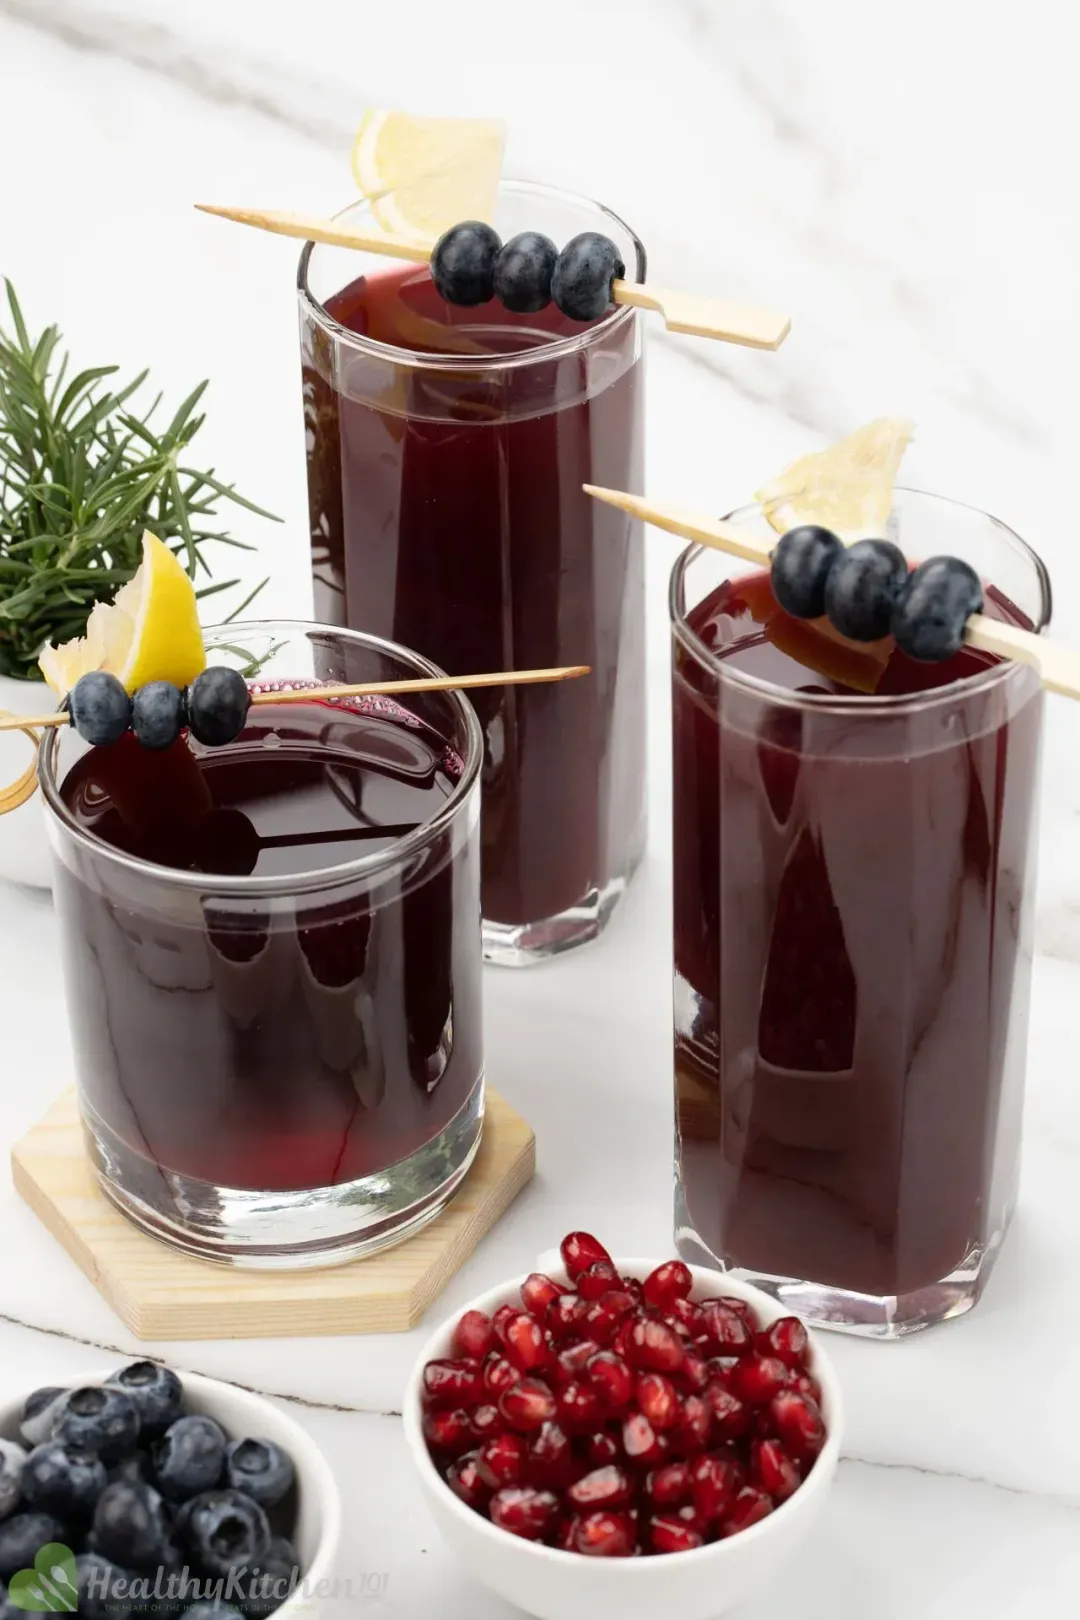 Tips for Making Pomegranate Blueberry Juice